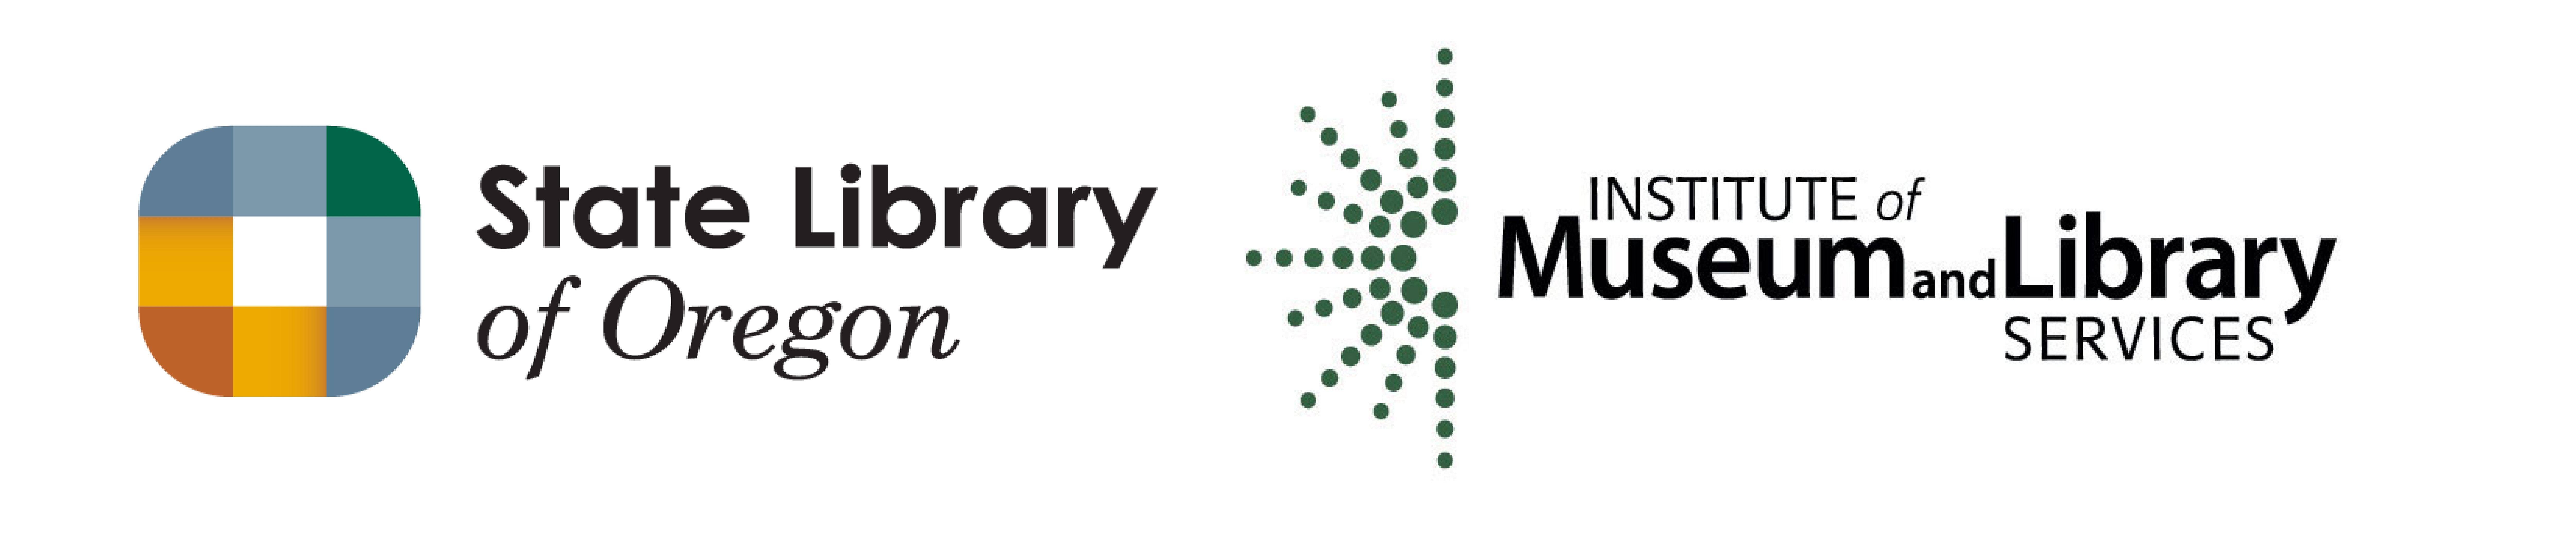 State Library of Oregon logo. Institute of Museum and Library Services logo.